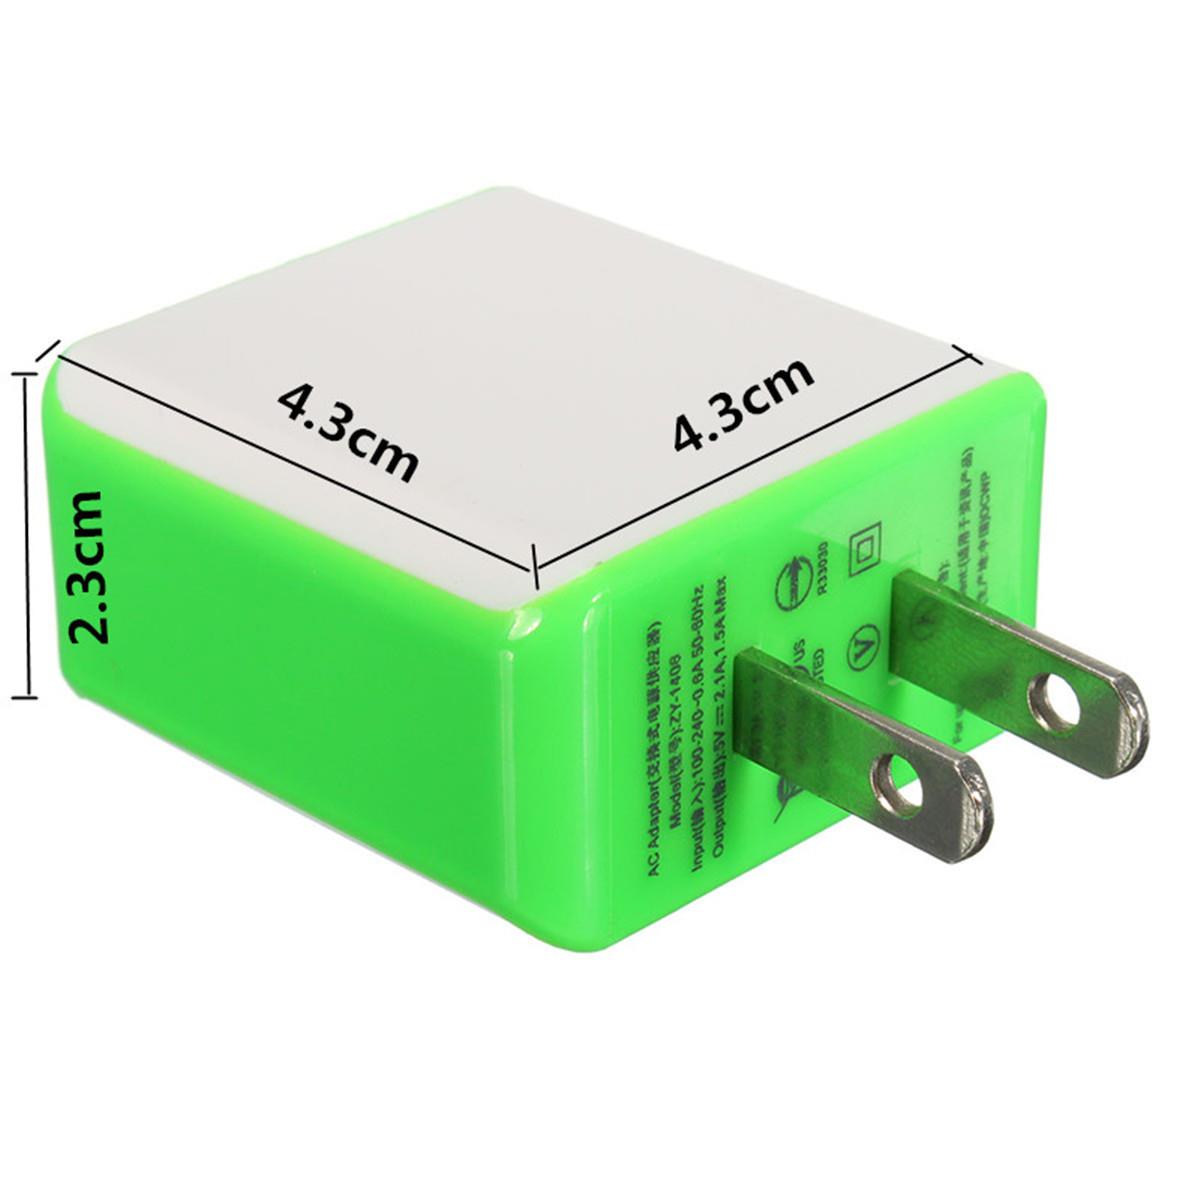 21A15A-Dual-2-USB-Wall-Charger-LED-Home-Travel-Charging-Power-Adapter-US-Plug-1055200